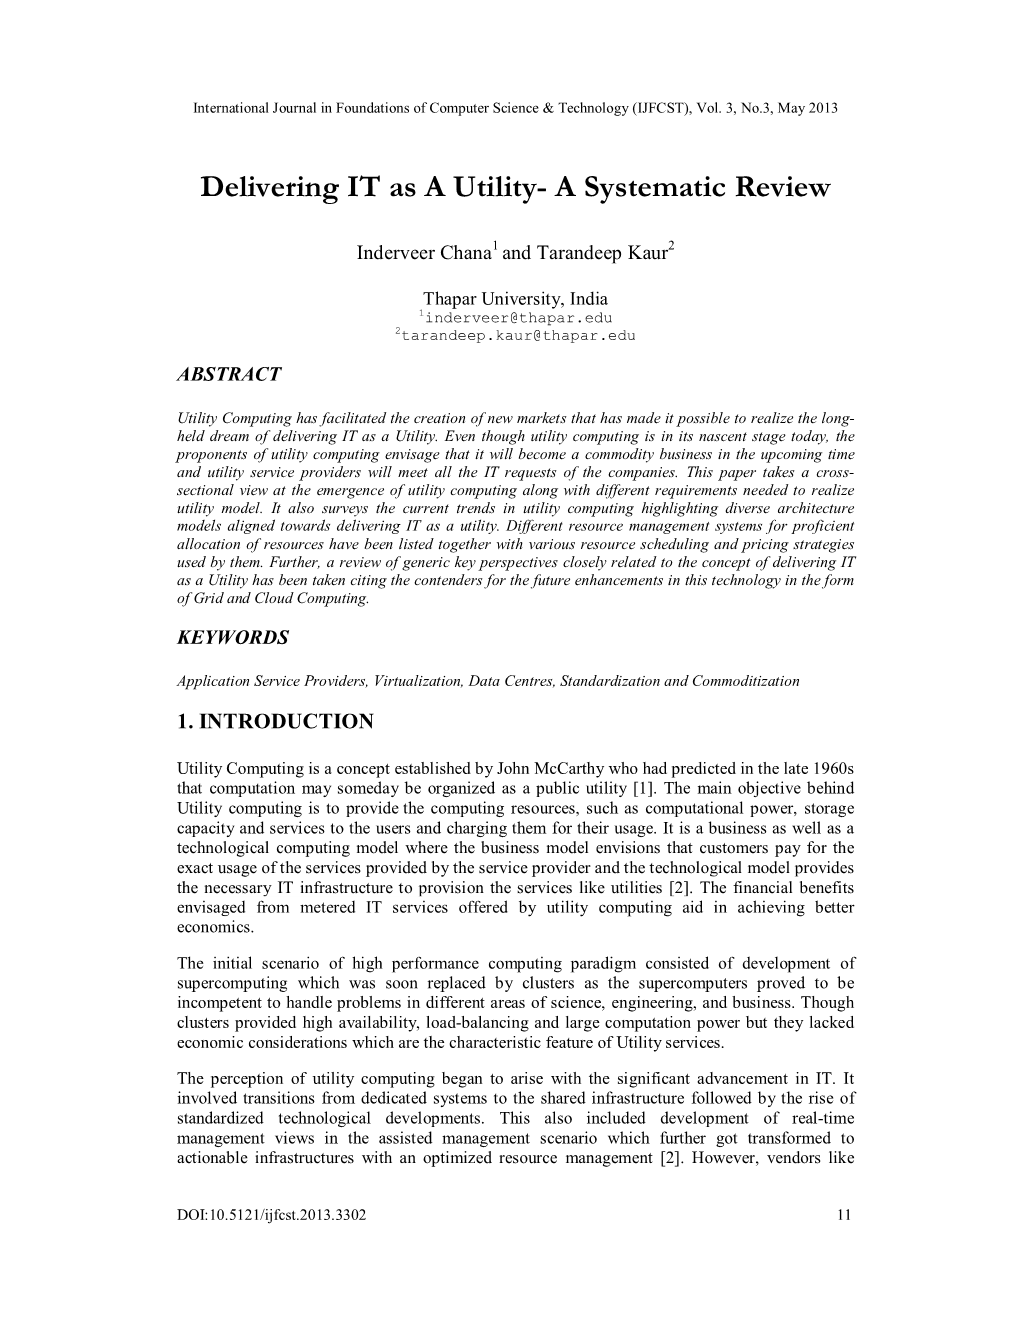 Delivering IT As a Utility- a Systematic Review